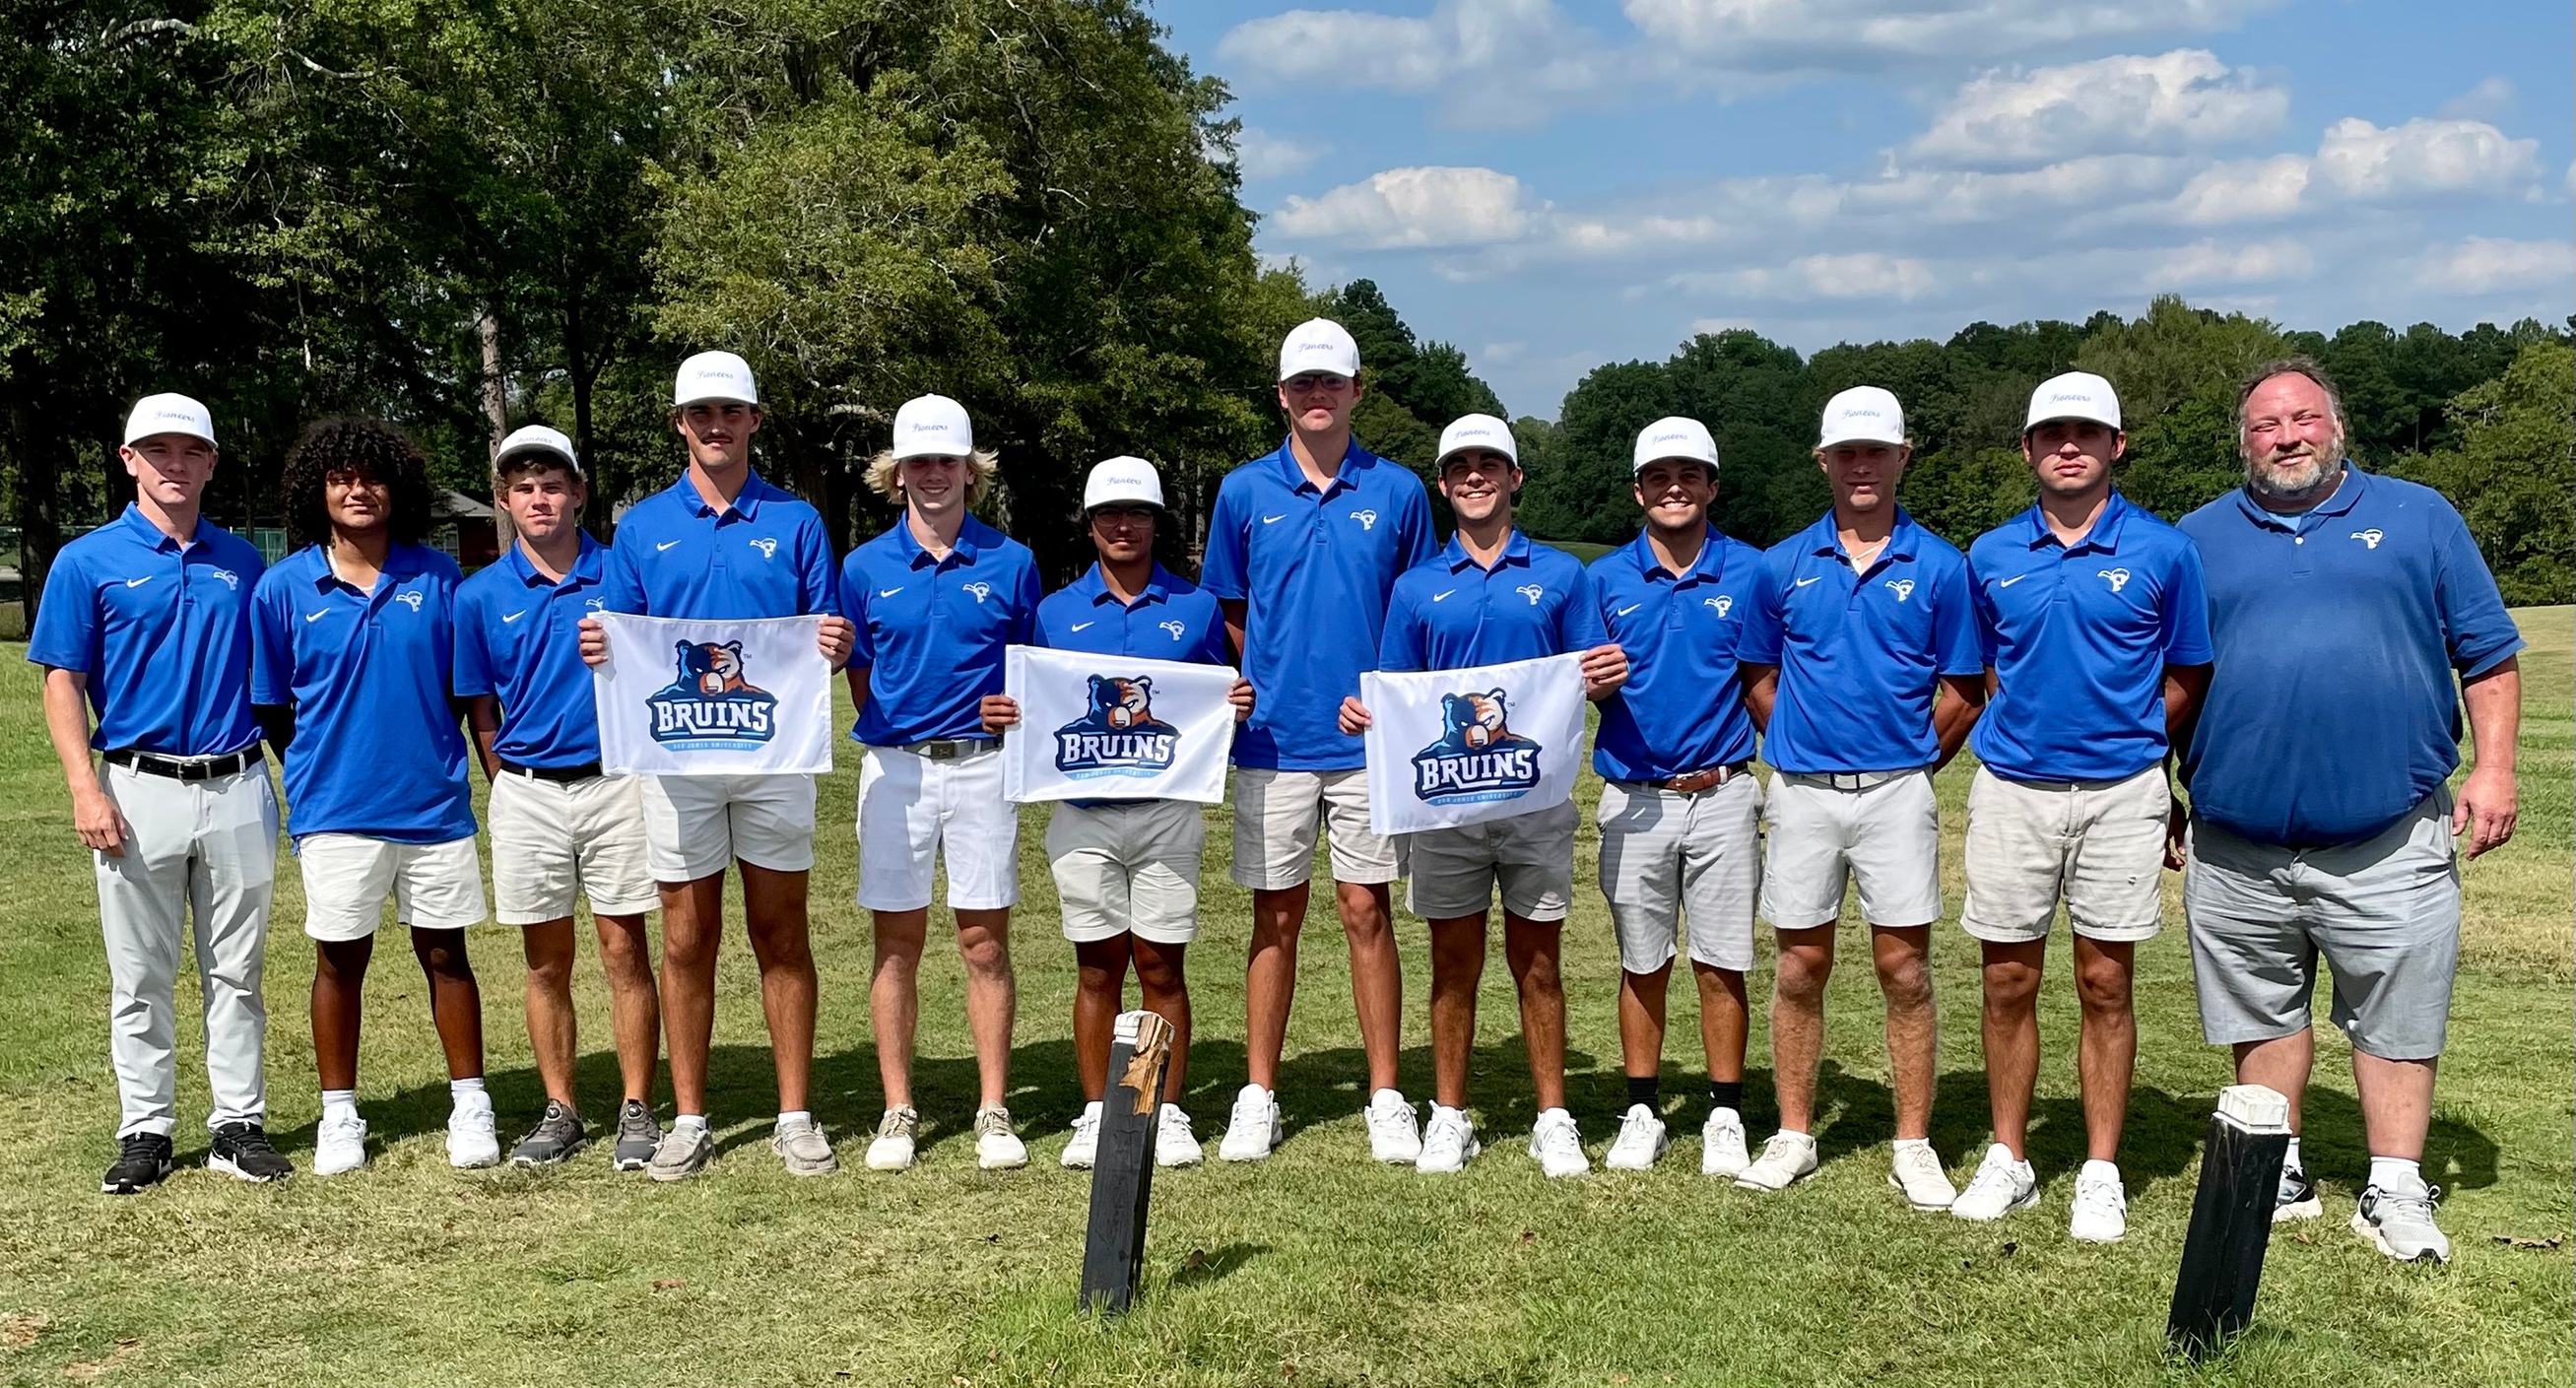 Pioneers Bring Home the Championship at the Bruins Golf Classic